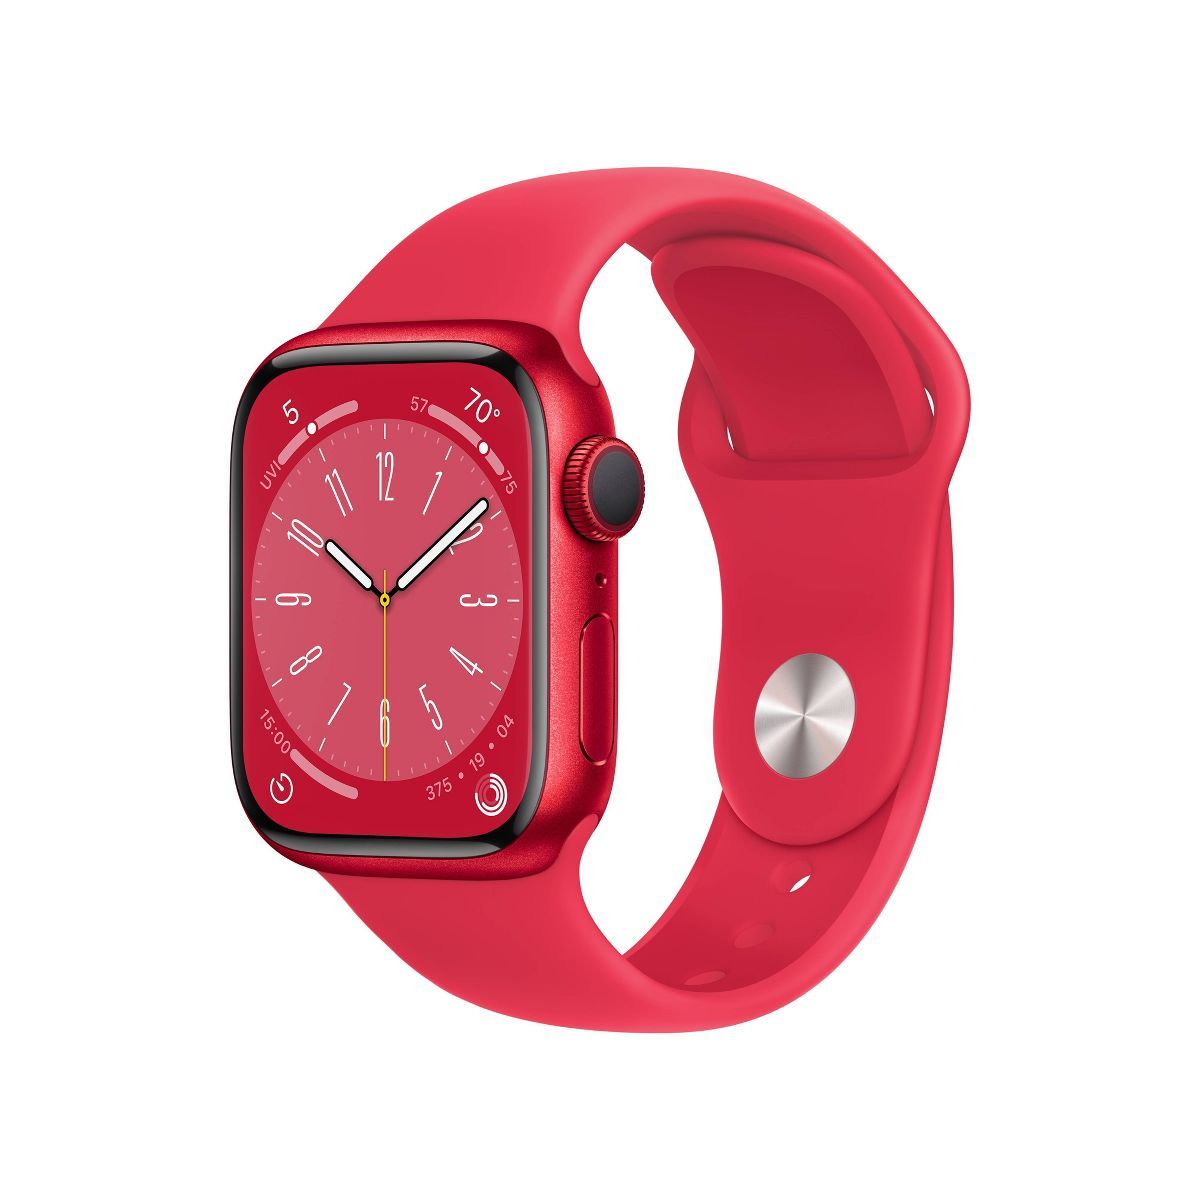 Apple Watch Series 8 GPS Aluminum Case with Sport Band | Target